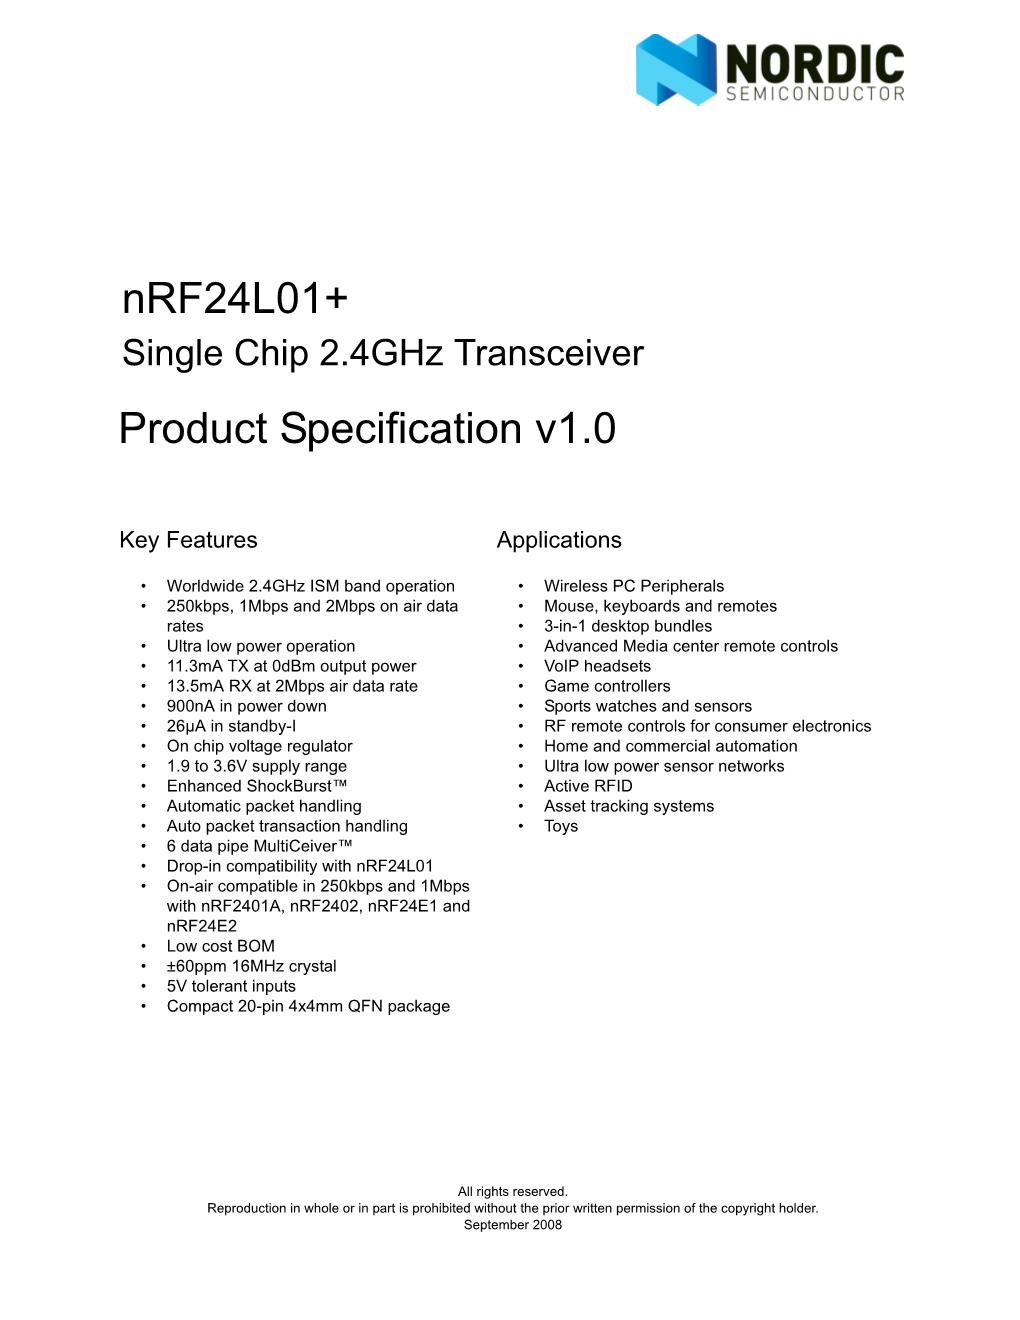 Single Chip 2.4Ghz Transceiver Product Specification V1.0